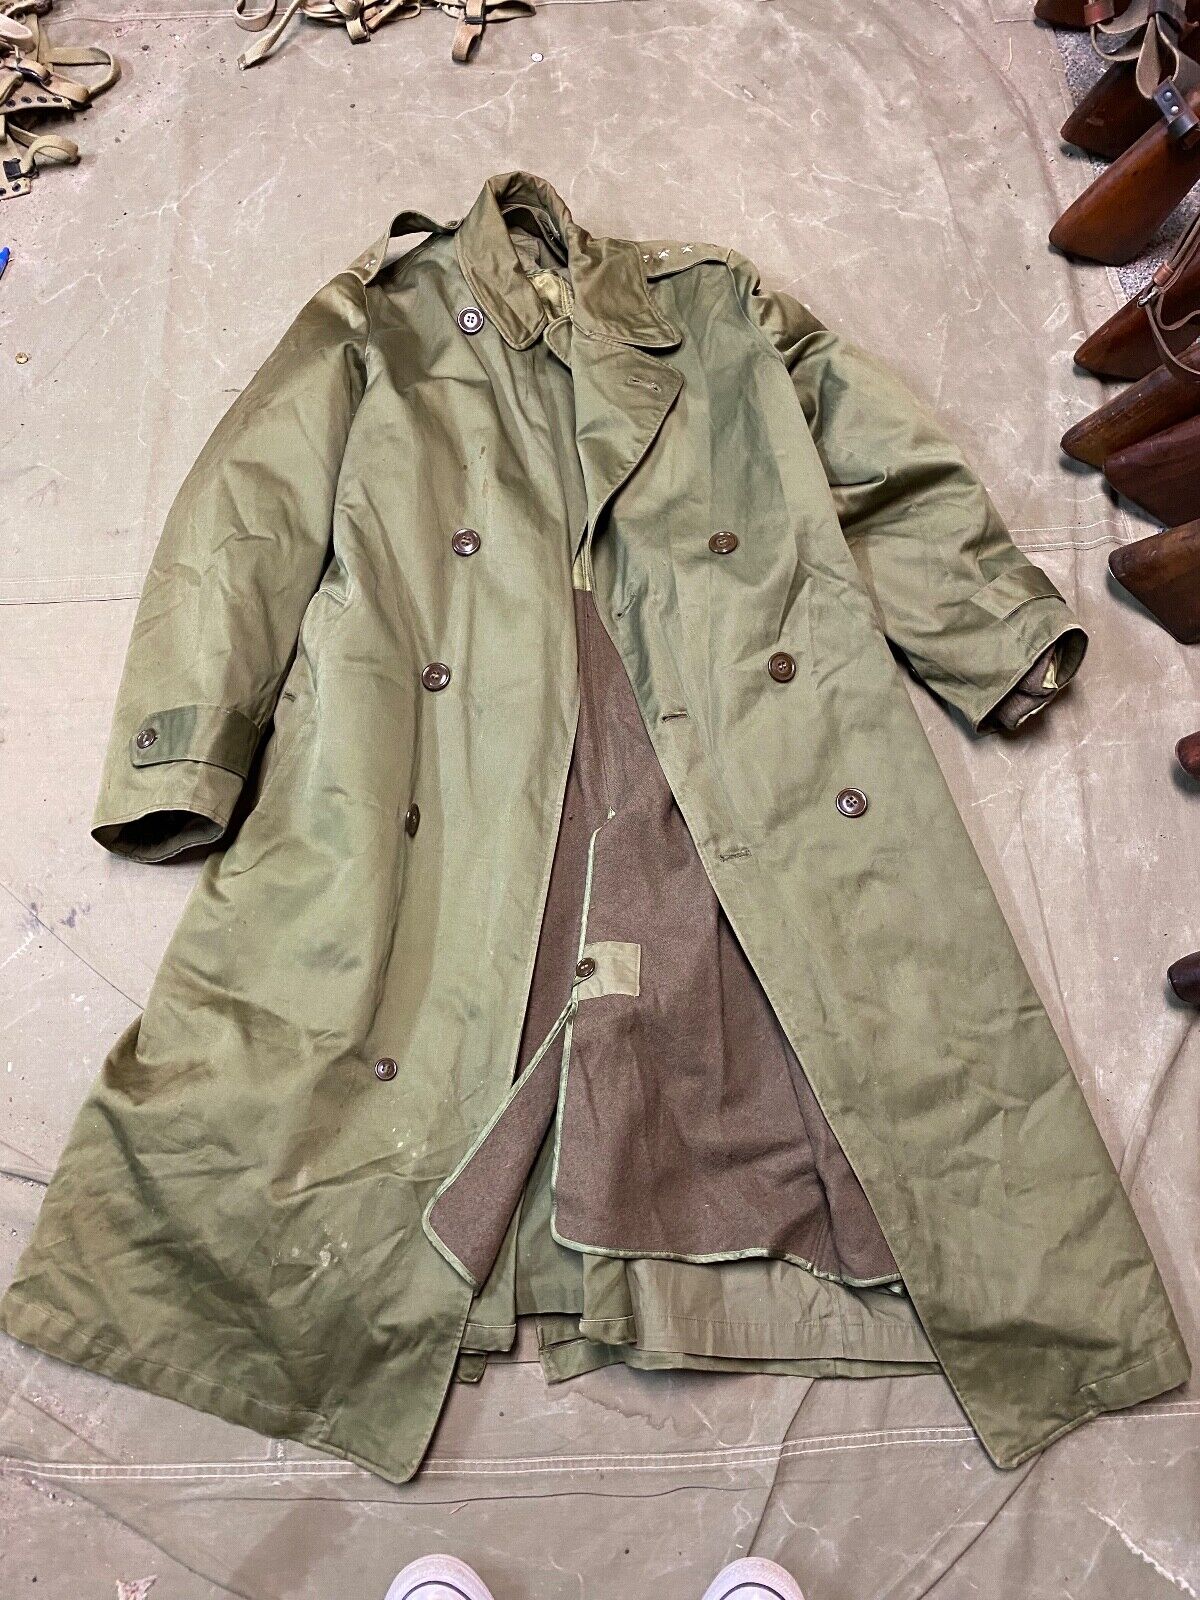 ORIGINAL WWII US ARMY OFFICER M1938 TRENCH JACKET COAT-SIZE MEDIUM 40R